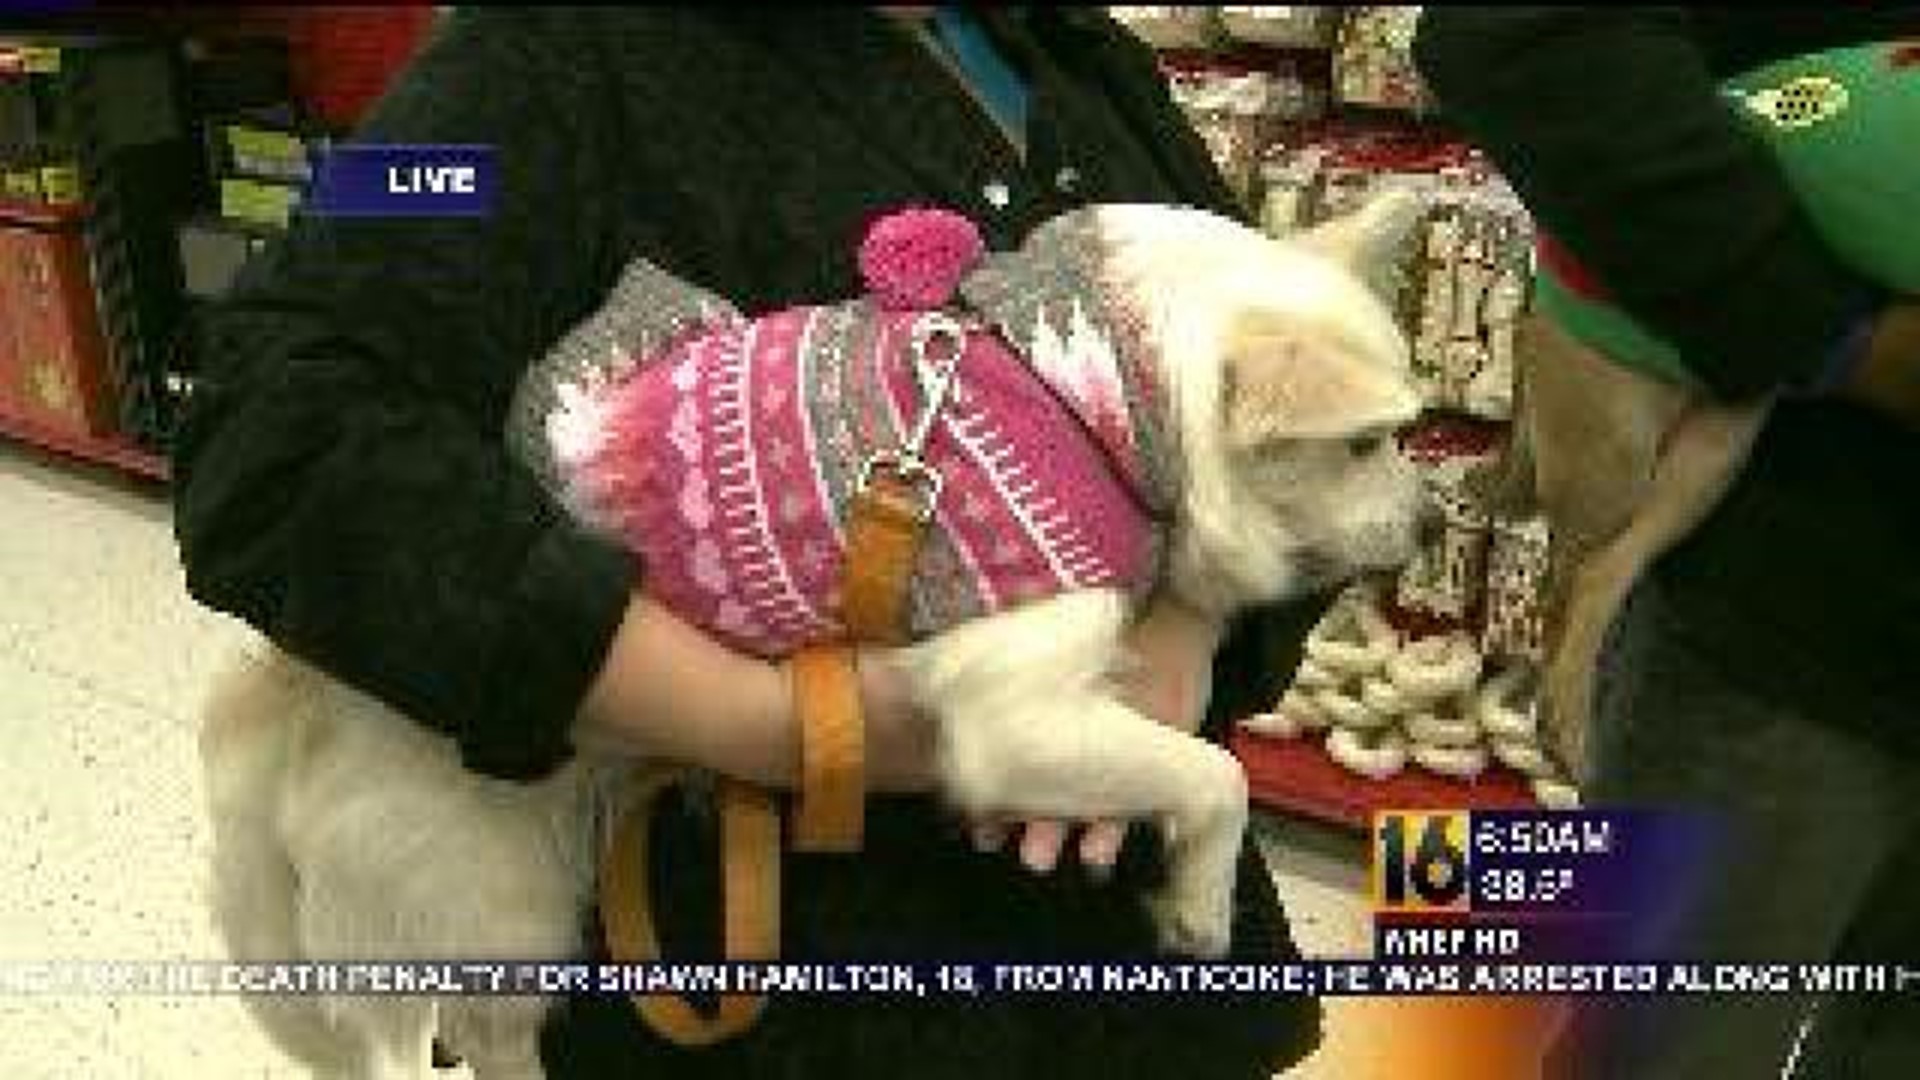 Holiday Gifts For Pets And SPCA Visits